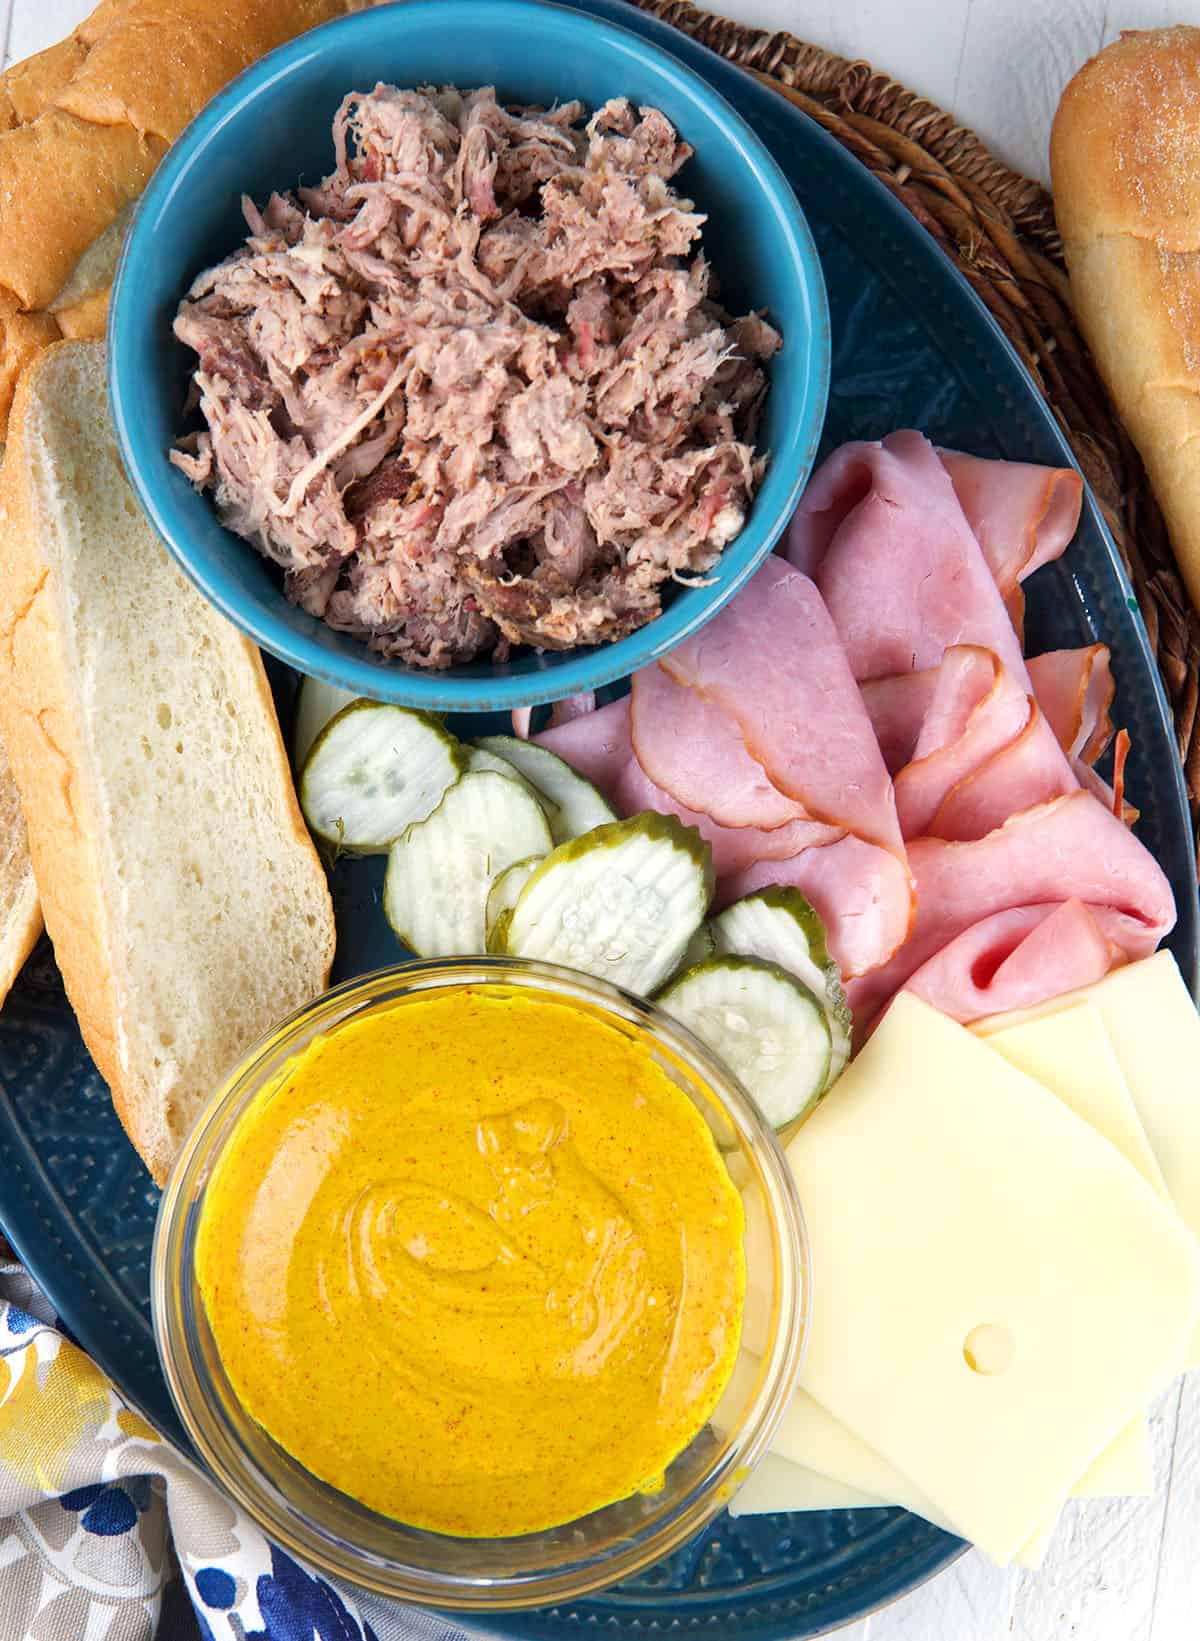 The ingredients for a cuban sandwich are spread out. 